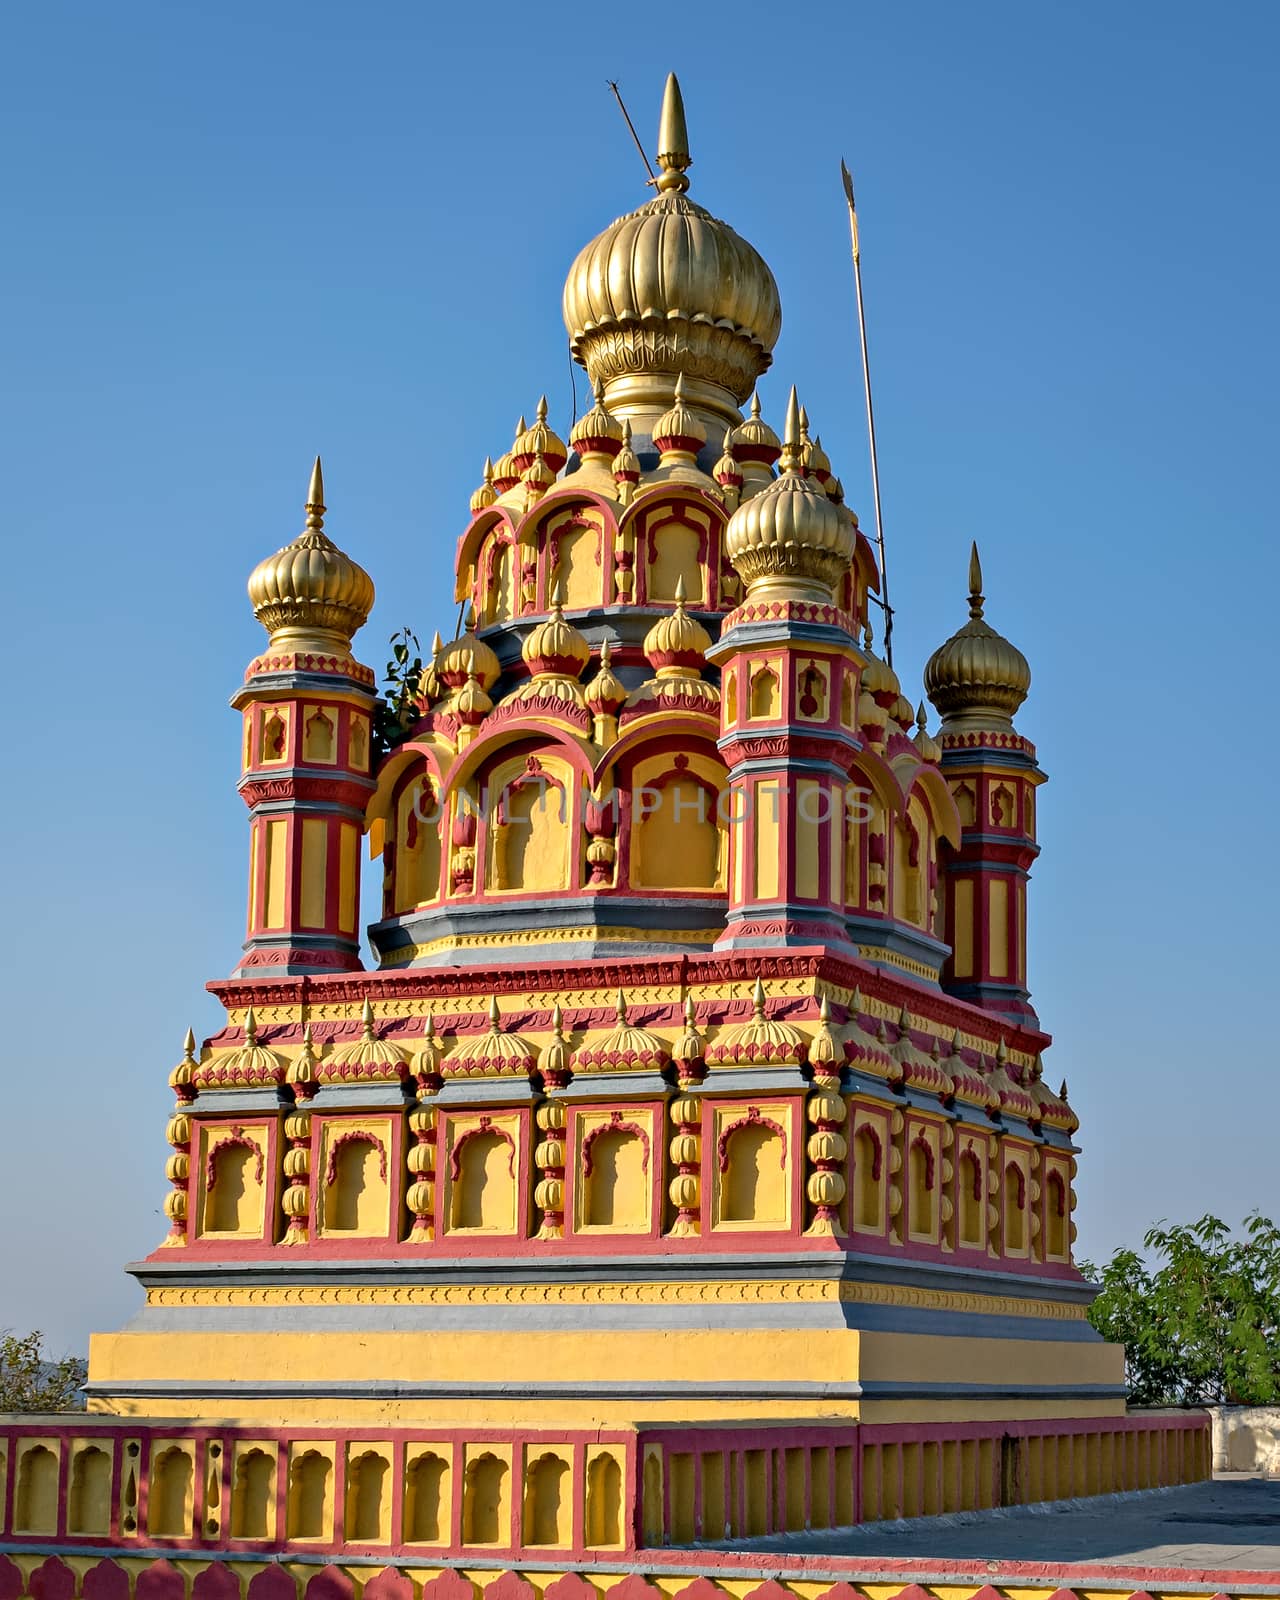 Colorful dome of oldest heritage structure in Pune - Parvati temple on a clear blue sky background on Parvati hill, Pune.